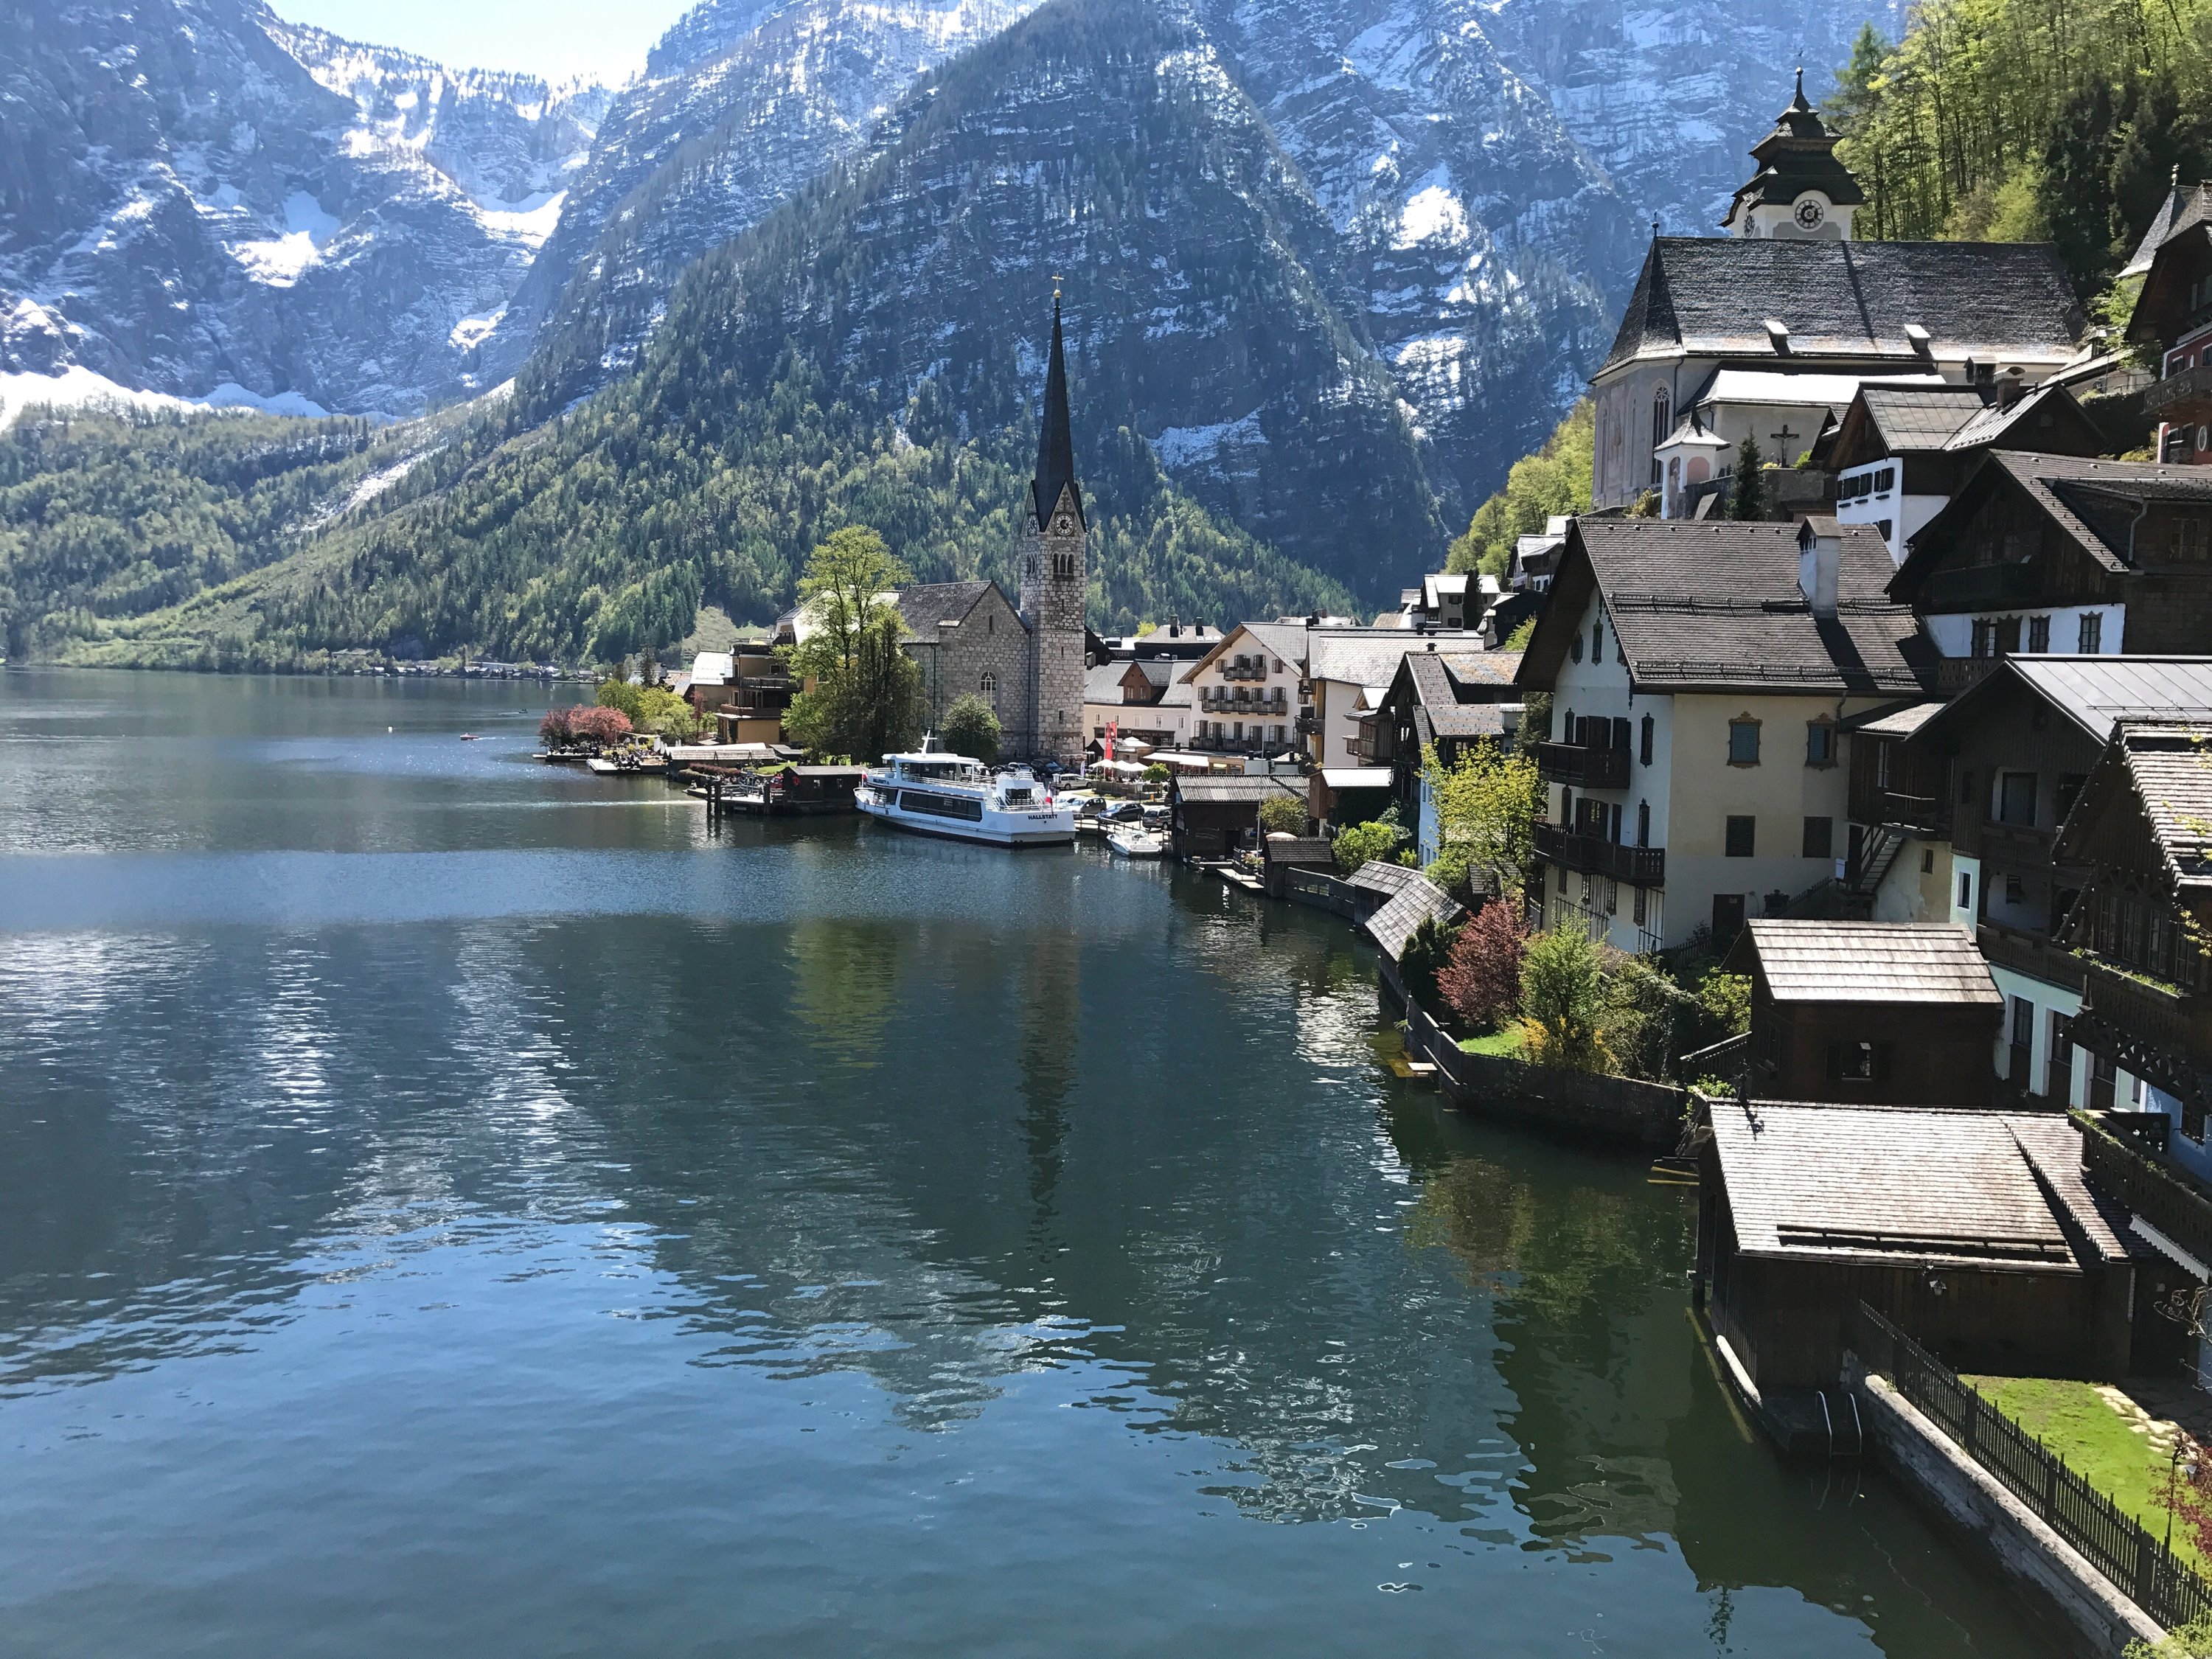 A view of the lake, the village and the Alps, in Hallstatt, Austria. (Photo by Özge Şengelen)